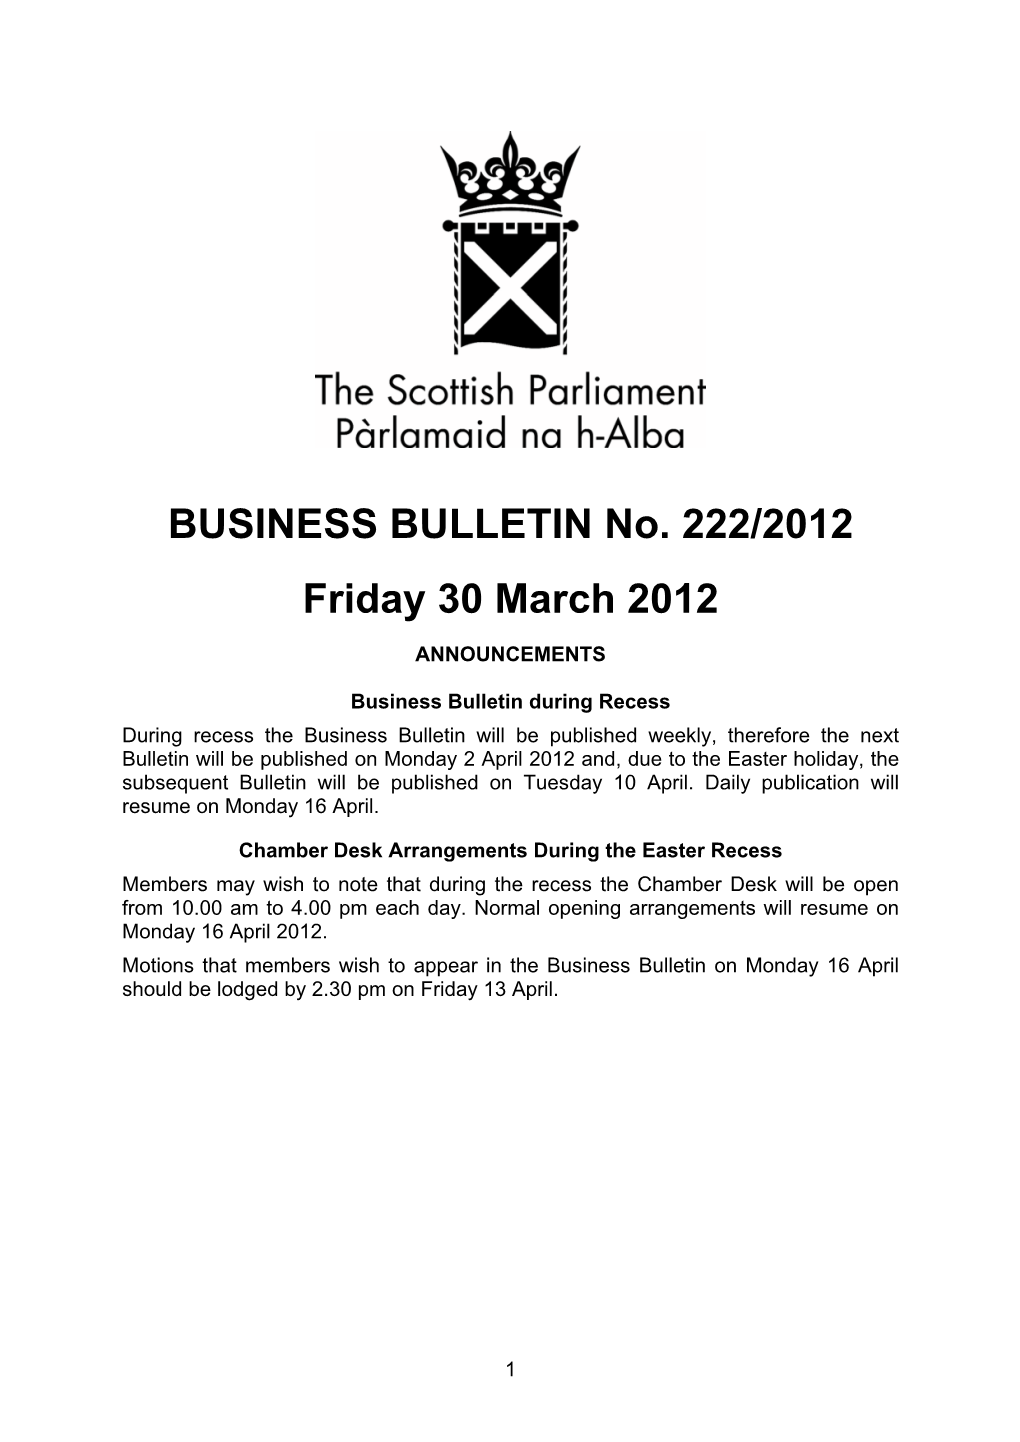 BUSINESS BULLETIN No. 222/2012 Friday 30 March 2012